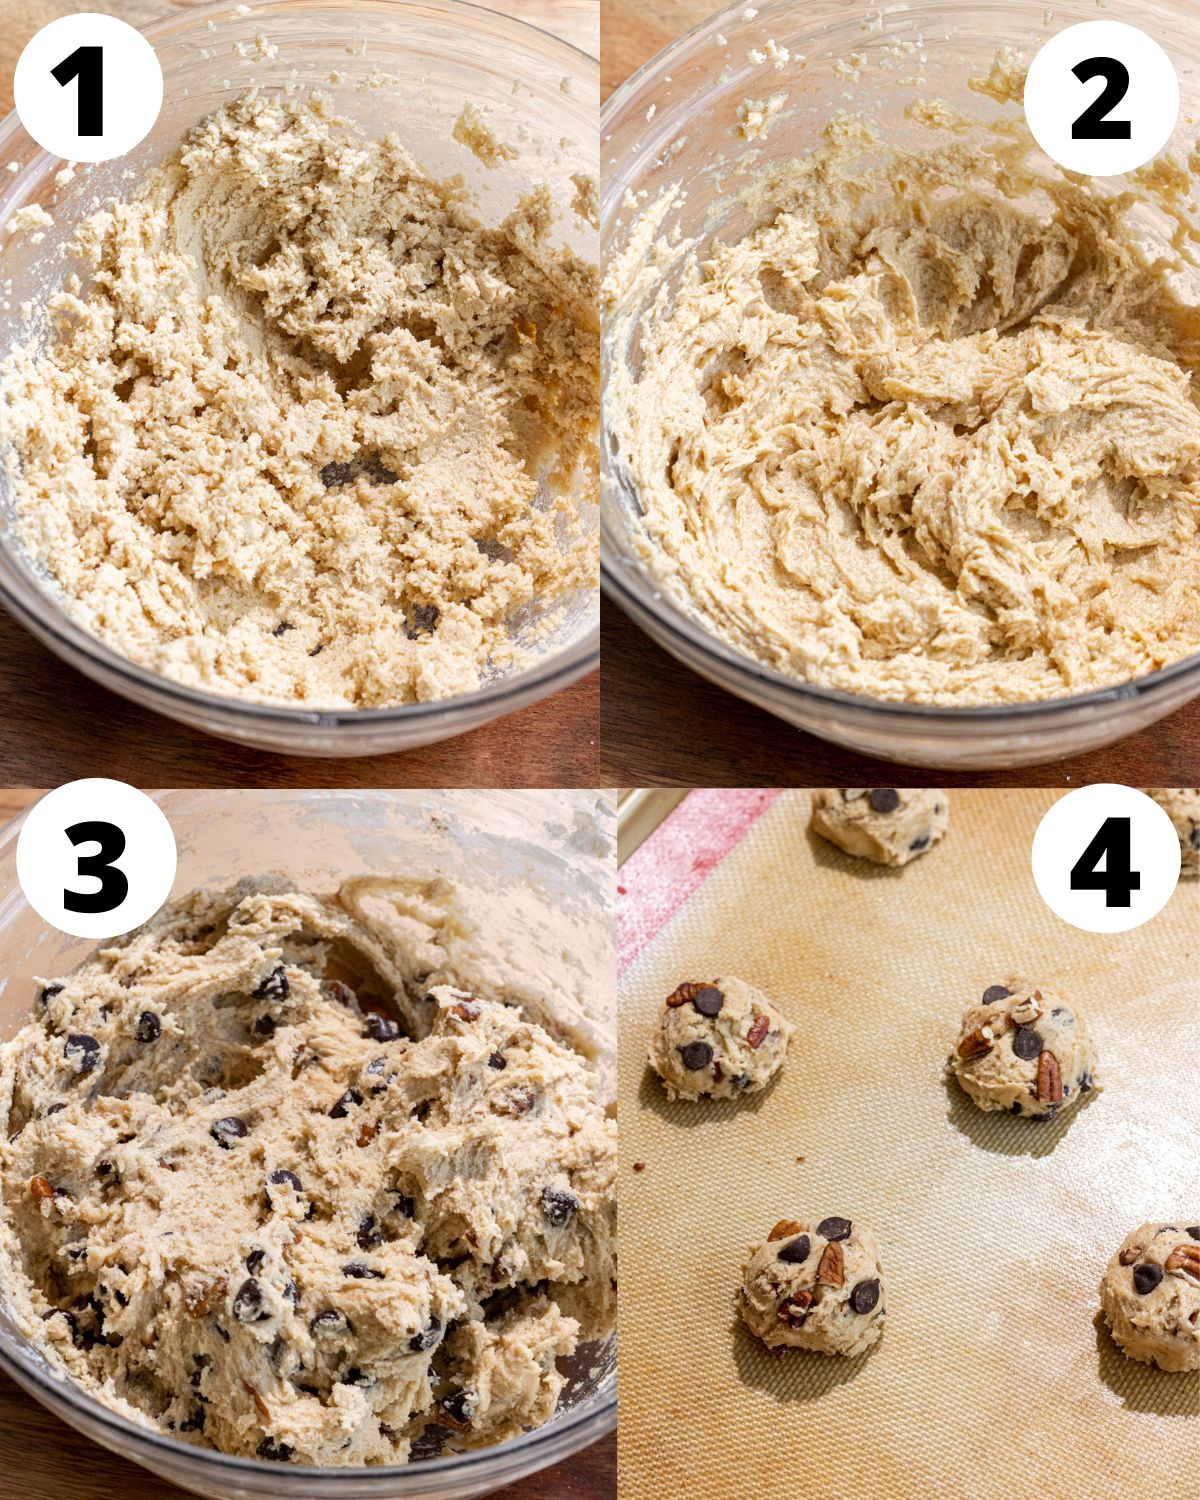 Baking process for Chocolate chip pecan cookies pictured in four steps